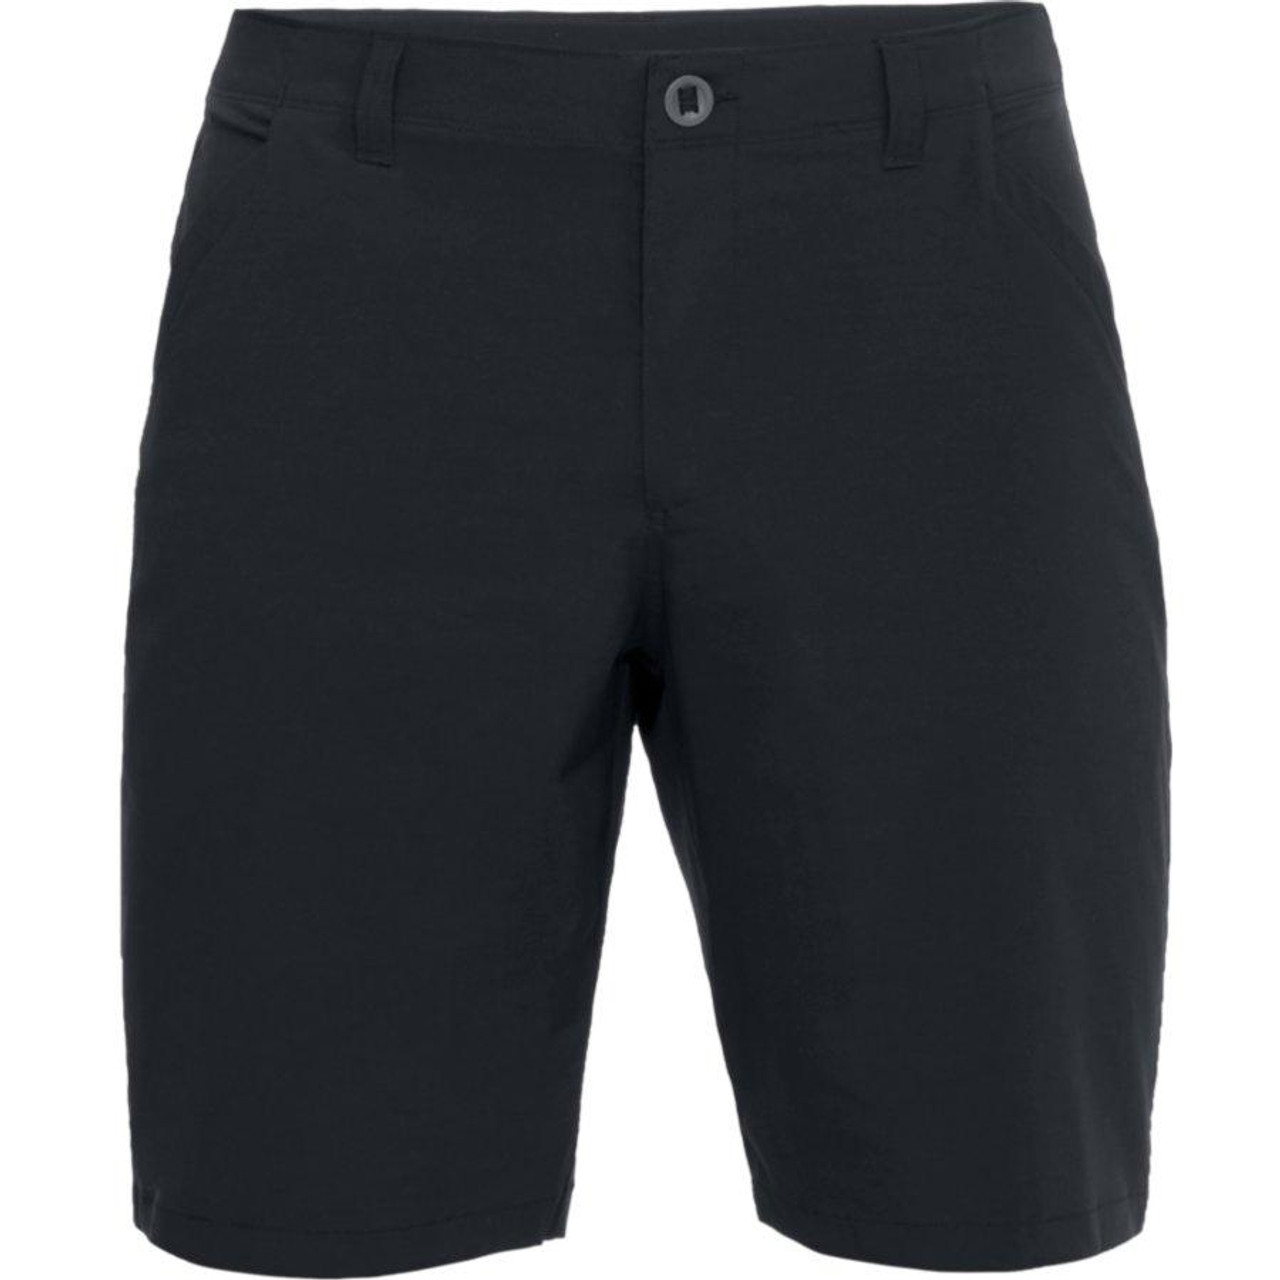 Under Armour Fish Hunter Shorts | Rogers Sporting Goods